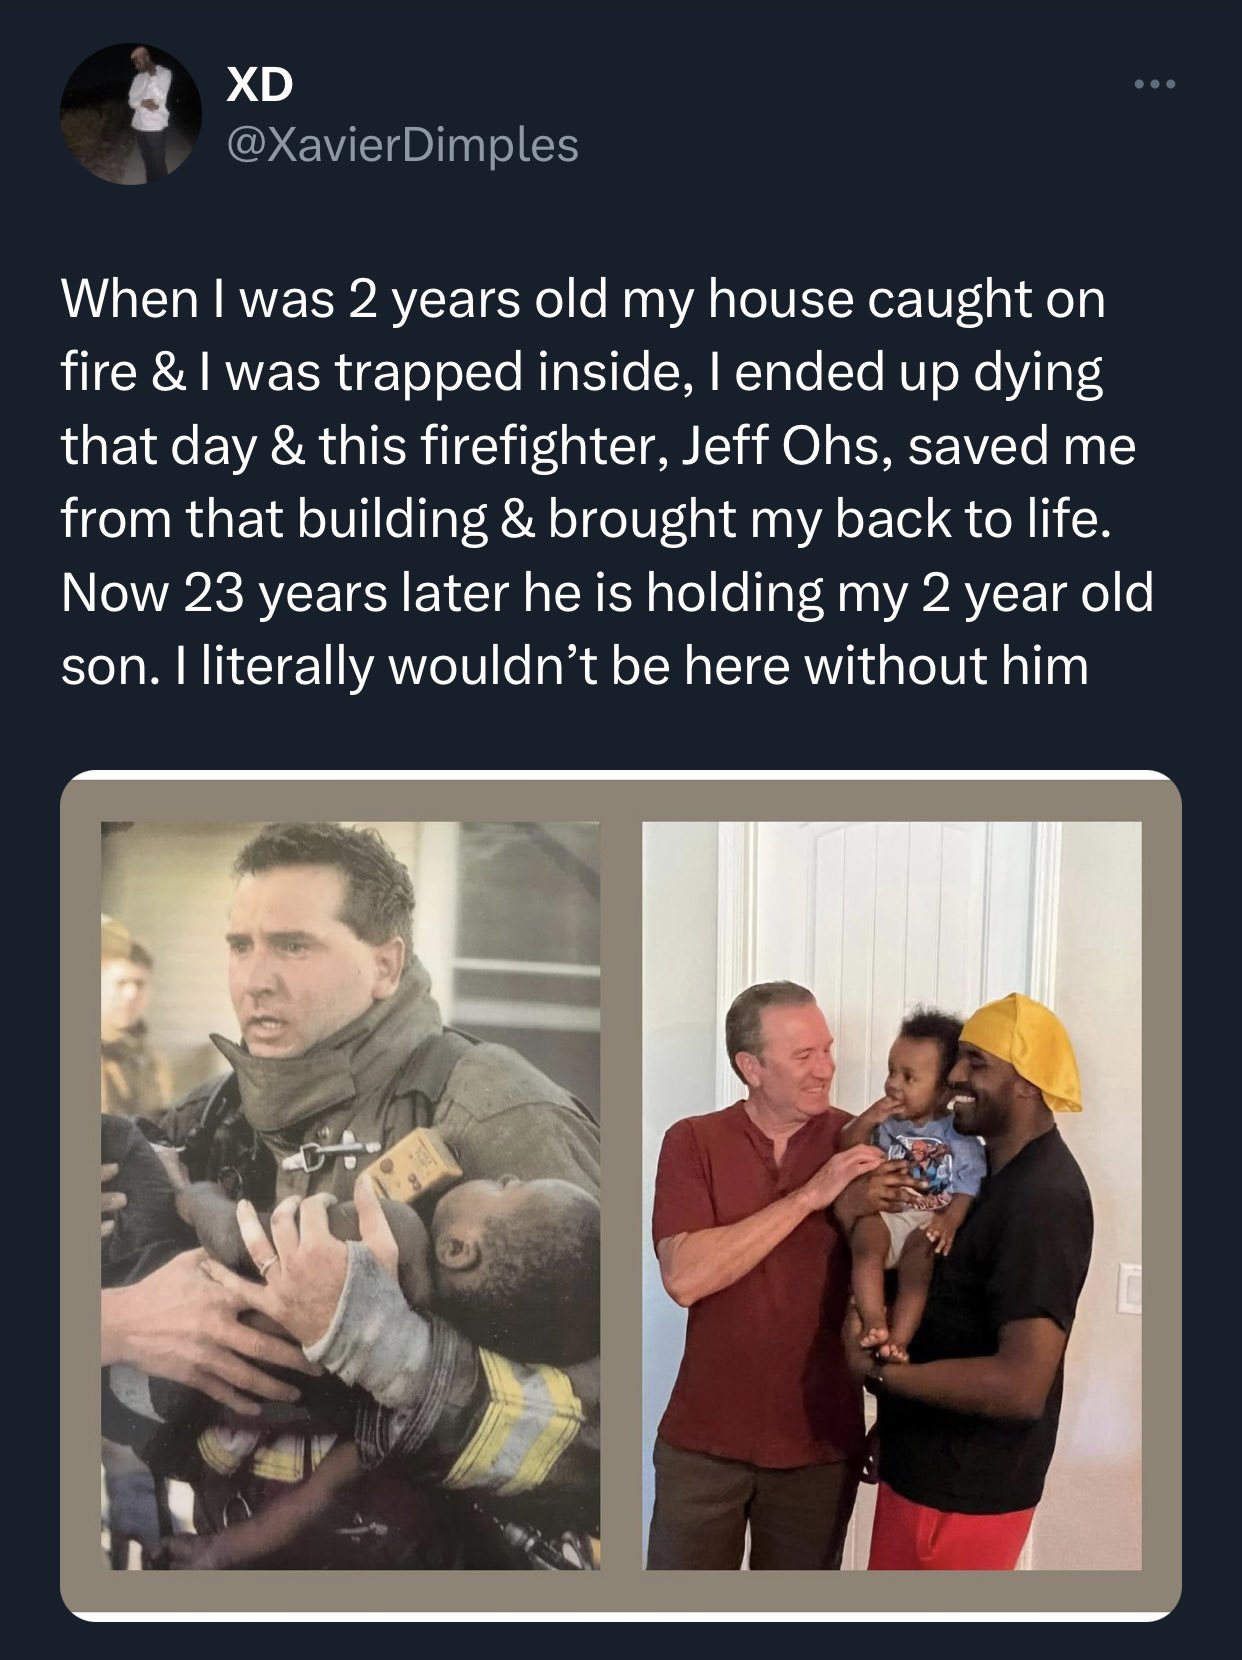 dudes posting their Ws - photo caption - Xd When I was 2 years old my house caught on fire & I was trapped inside, I ended up dying that day & this firefighter, Jeff Ohs, saved me from that building & brought my back to life. Now 23 years later he is hold